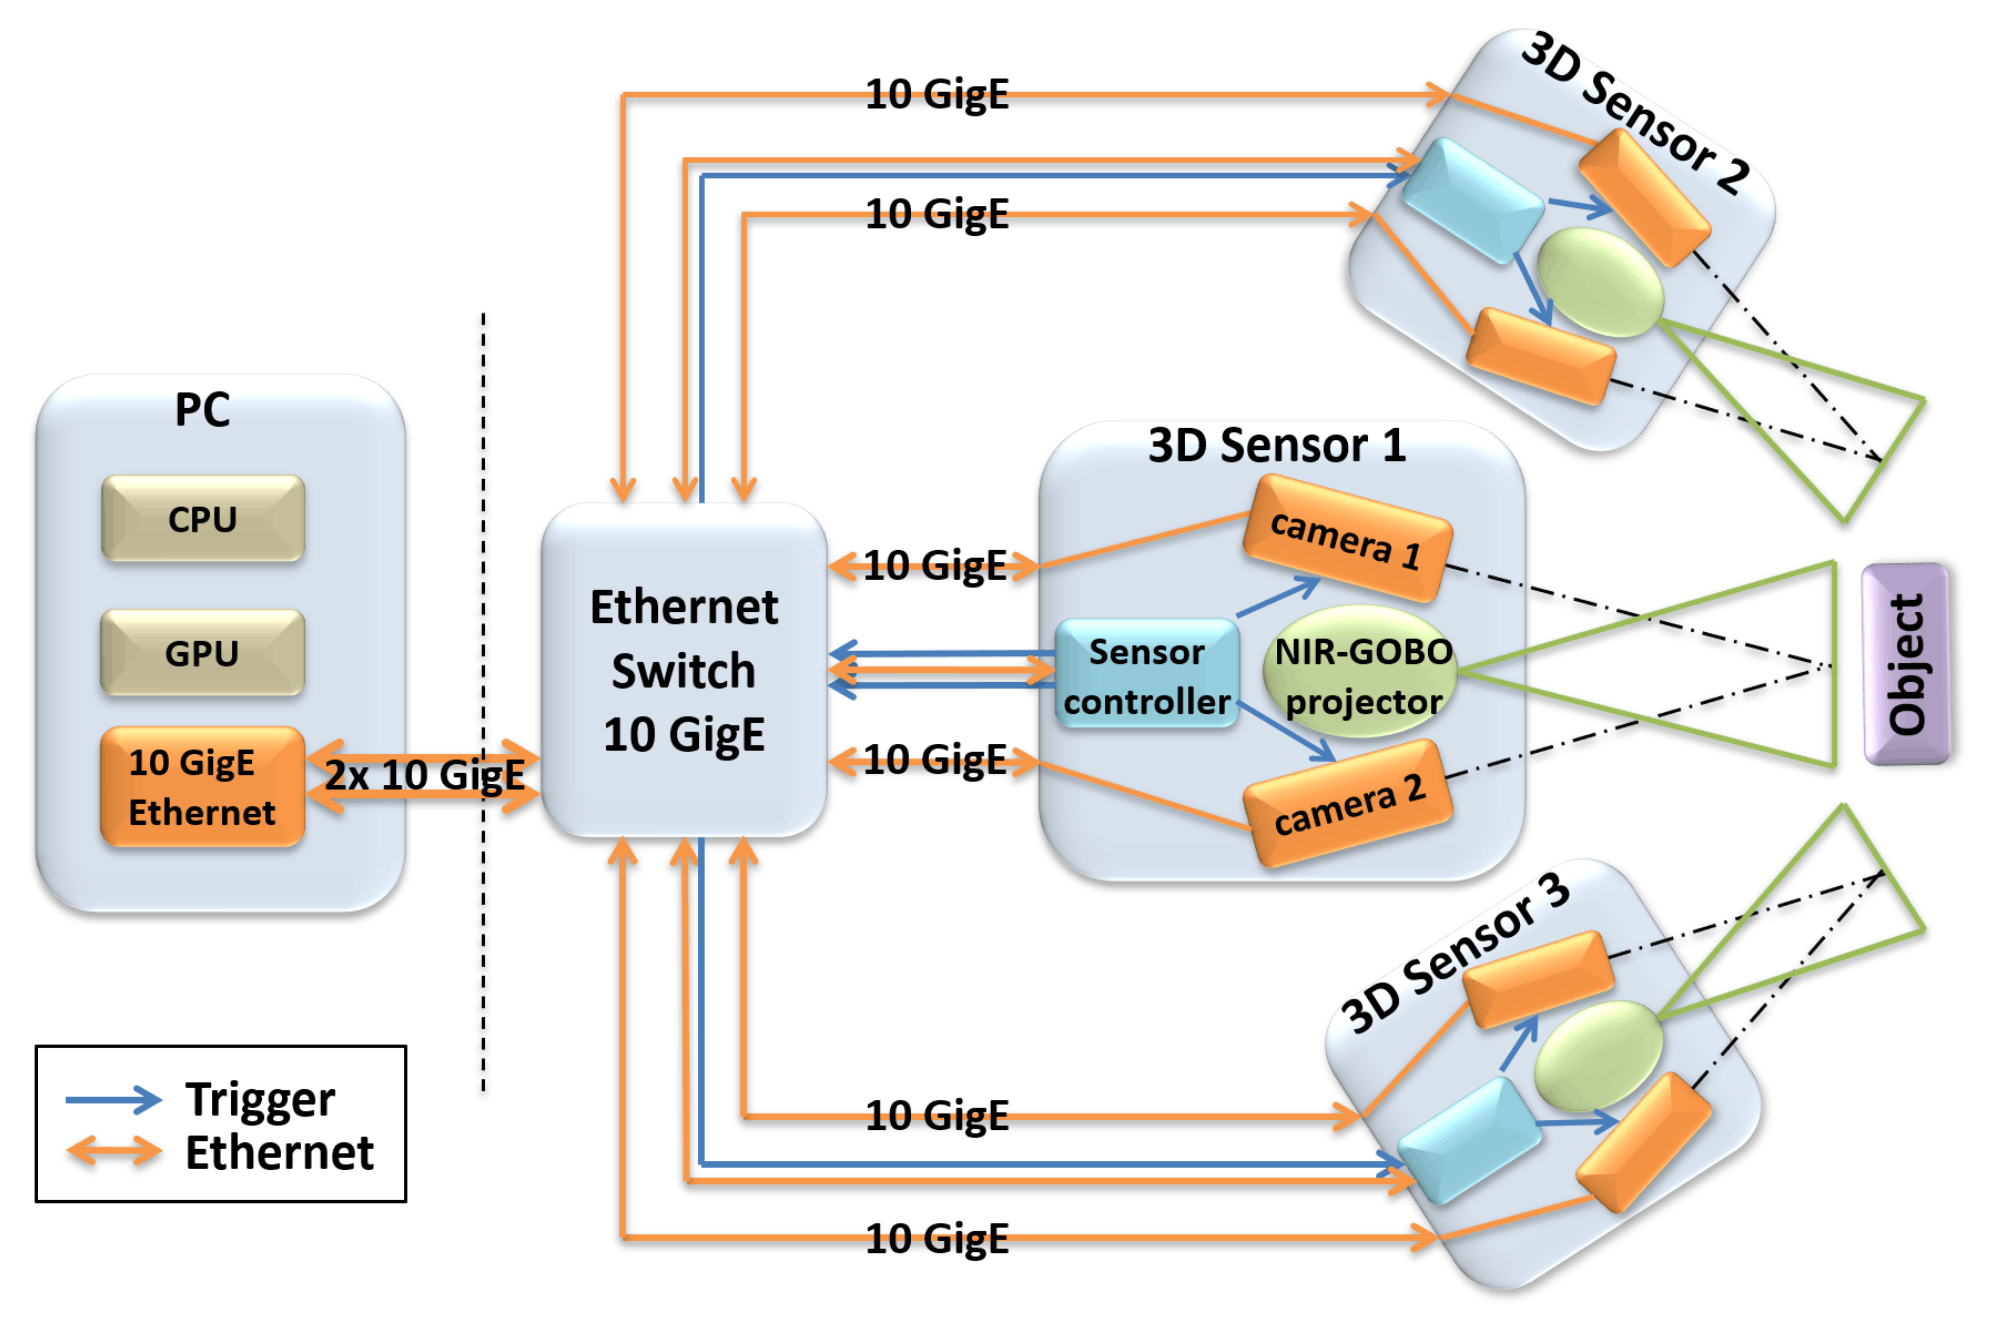 Overview of the 3D sensor network approach: Multiple 3D sensors record an object simultaneously from different perspectives. A data stream aggregator accumulates the data streams and forwards them bundled to a PC for evaluation. The sensor network controls itself autonomously via interconnected sensor controllers.